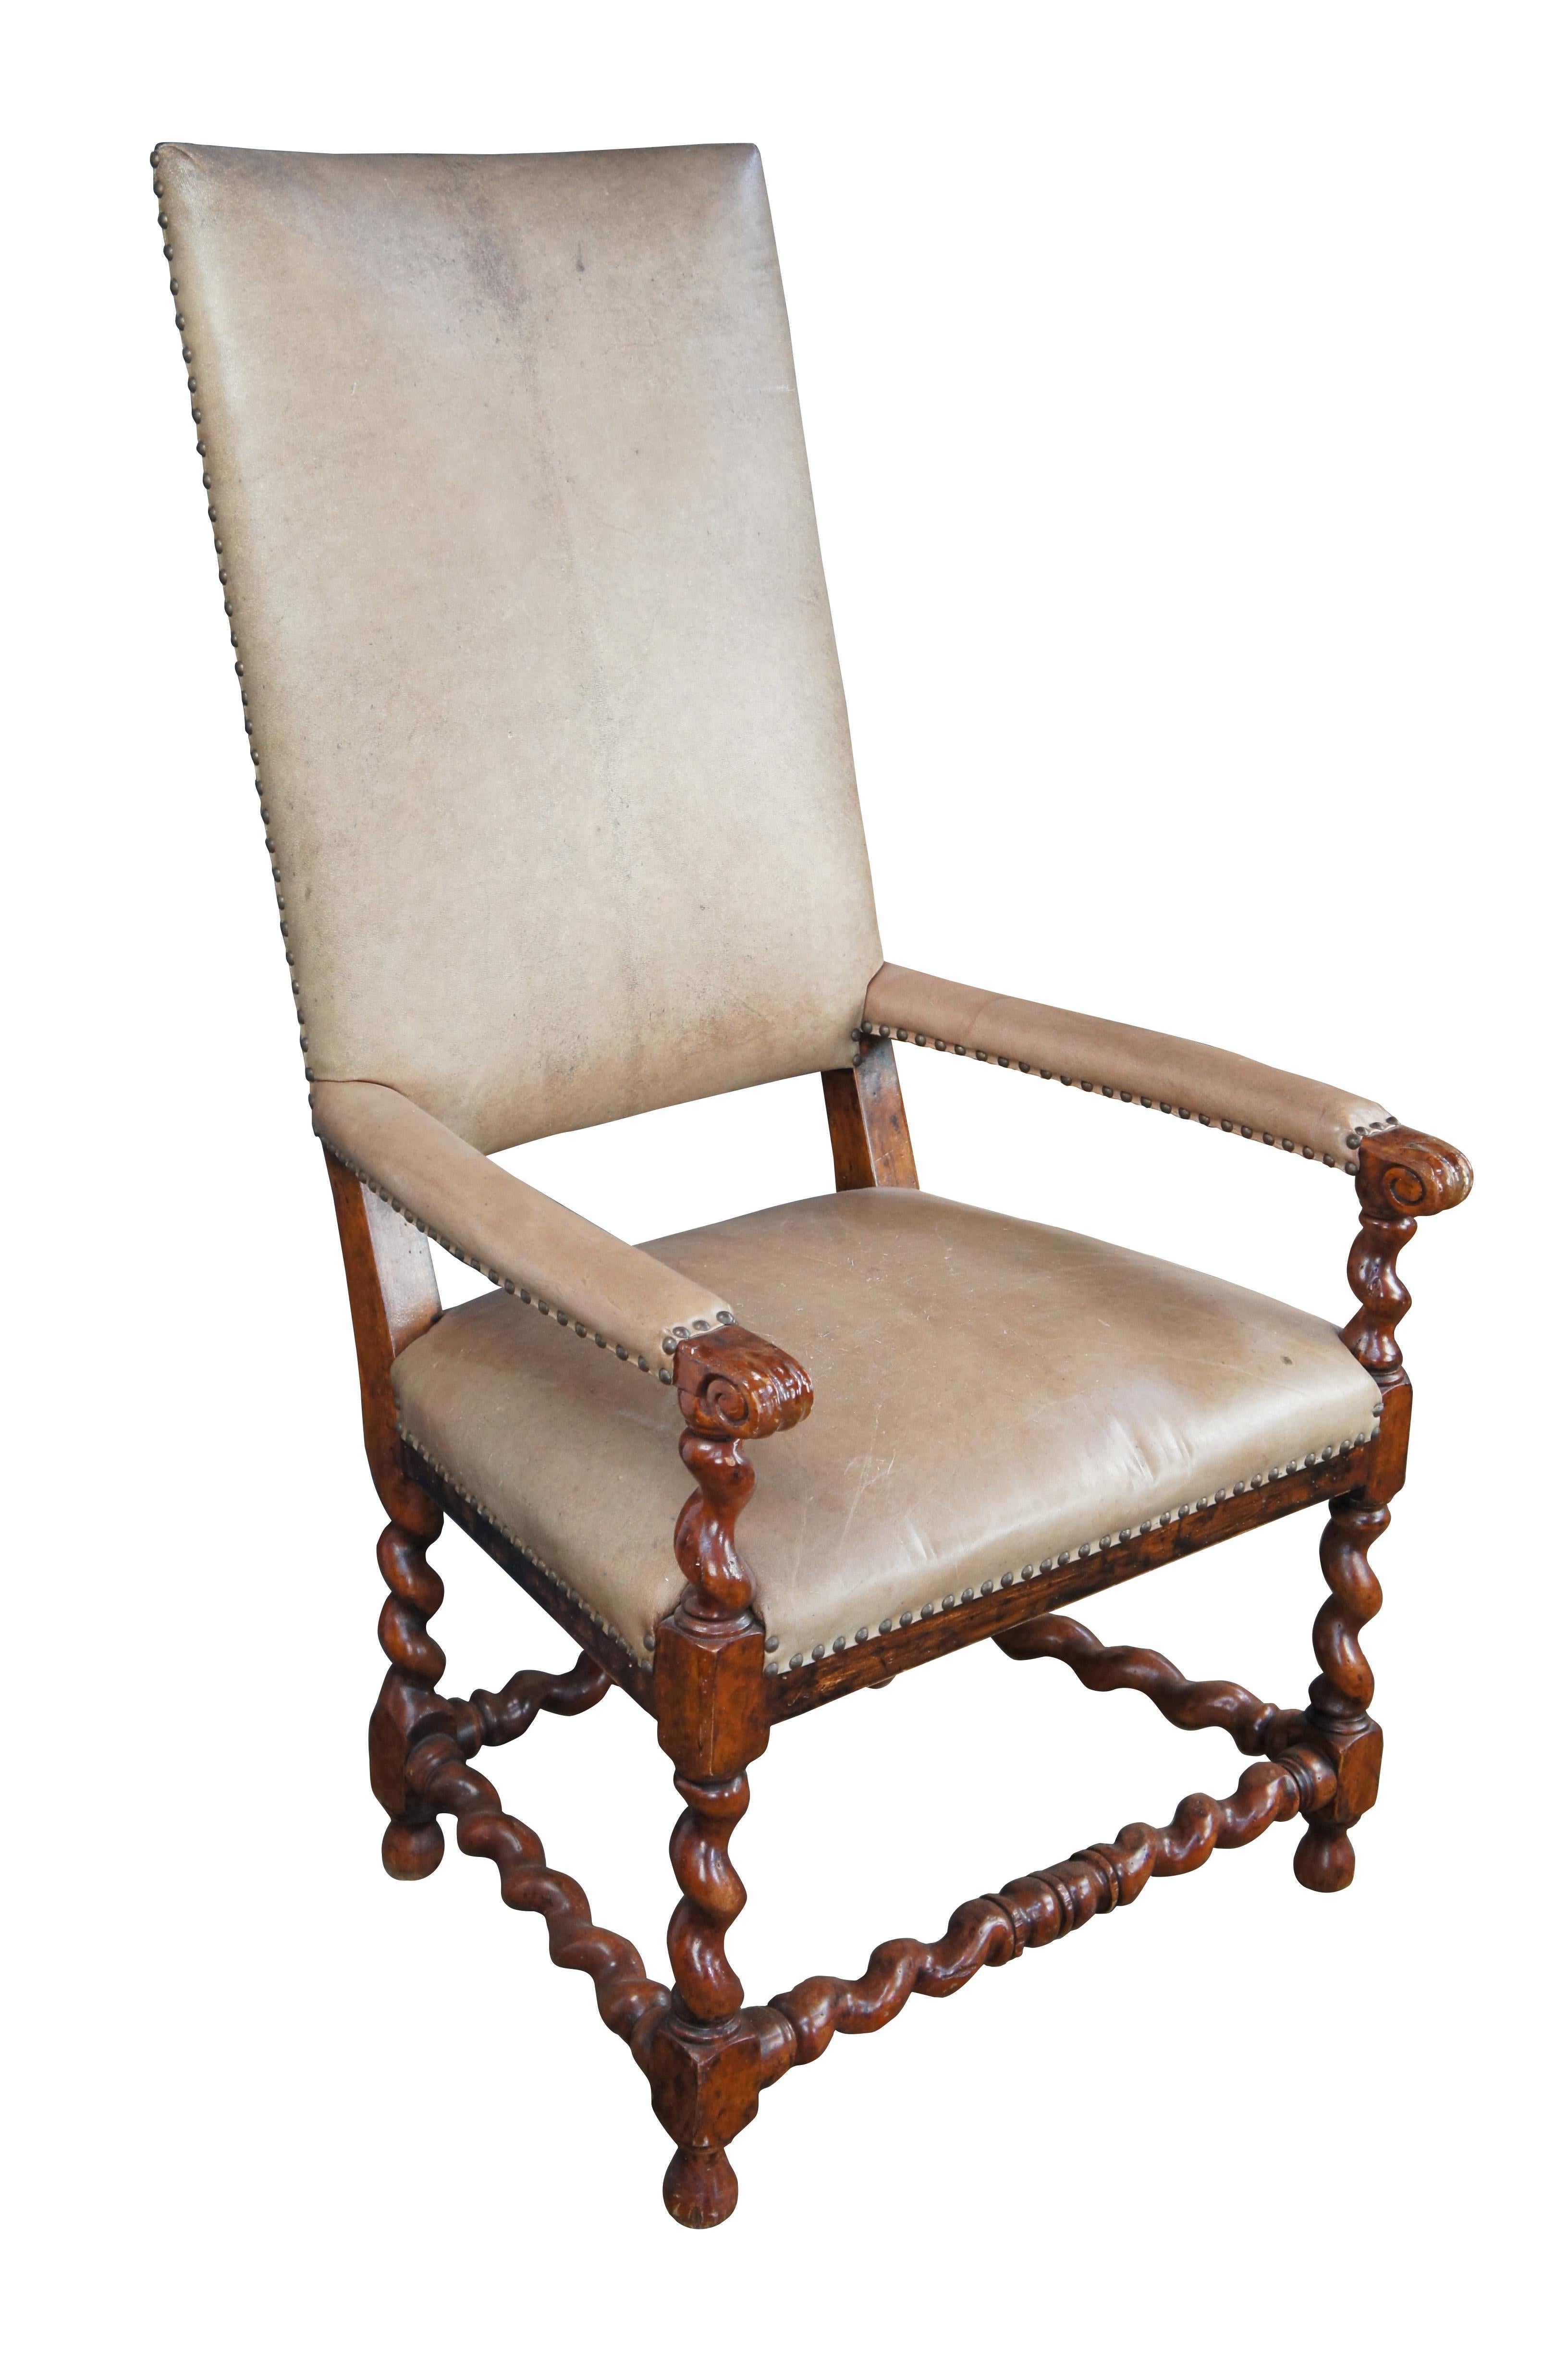 Theodore Alexander Louis XIII style Arm Chair, circa late 20th century. Features a walnut finish with a high leather upholstered back over padded scrolled arms and barley twist supports. Frame is naturally distressed. Includes brass nailhead